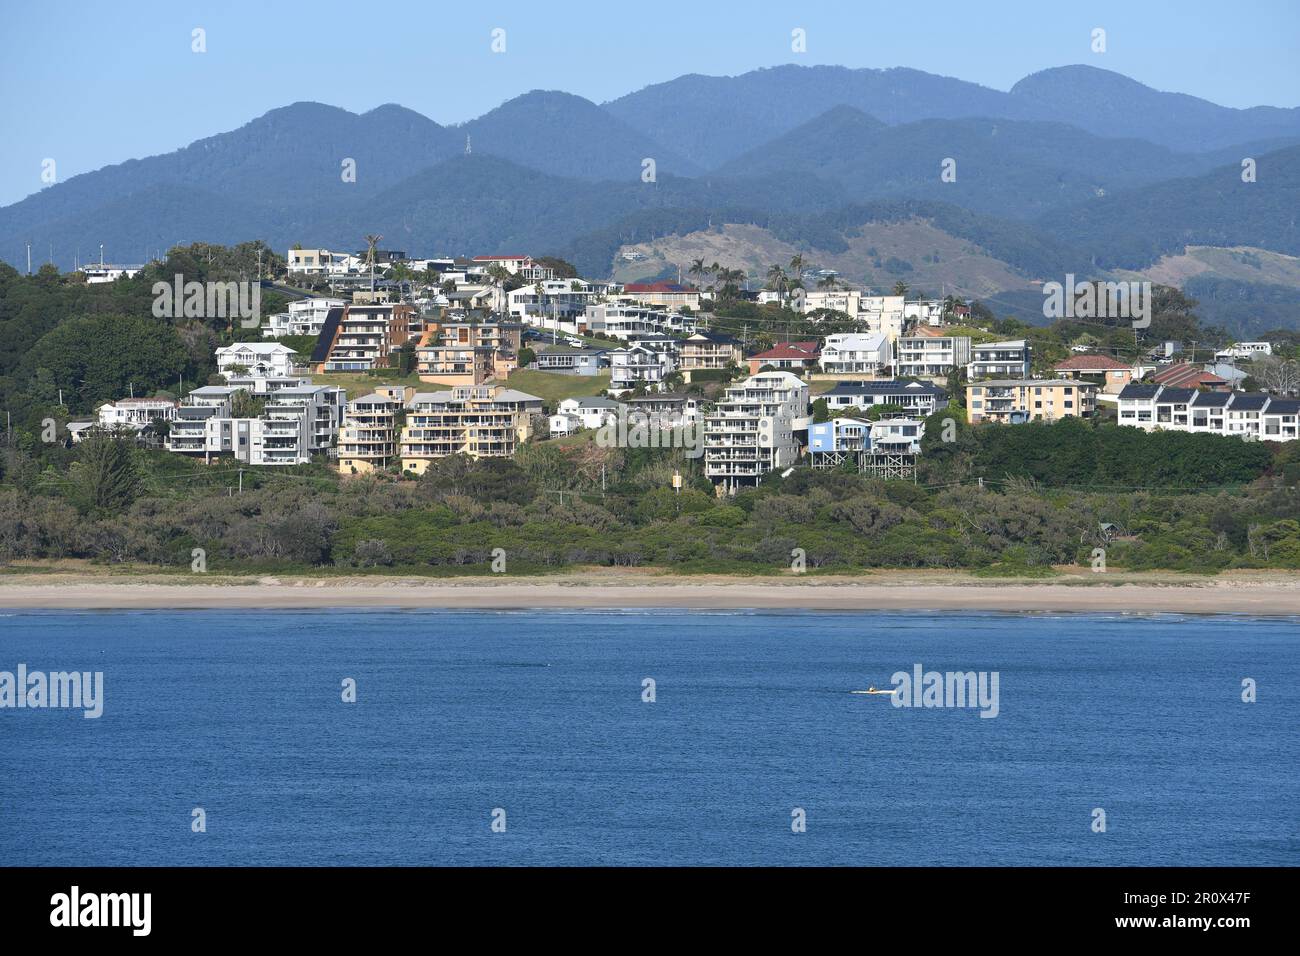 Coffs harbour aerial view of city, luxury hotel, resorts, beach, blue sea and hills in backdrop- A perfect holiday destination in NSW, Australia Stock Photo